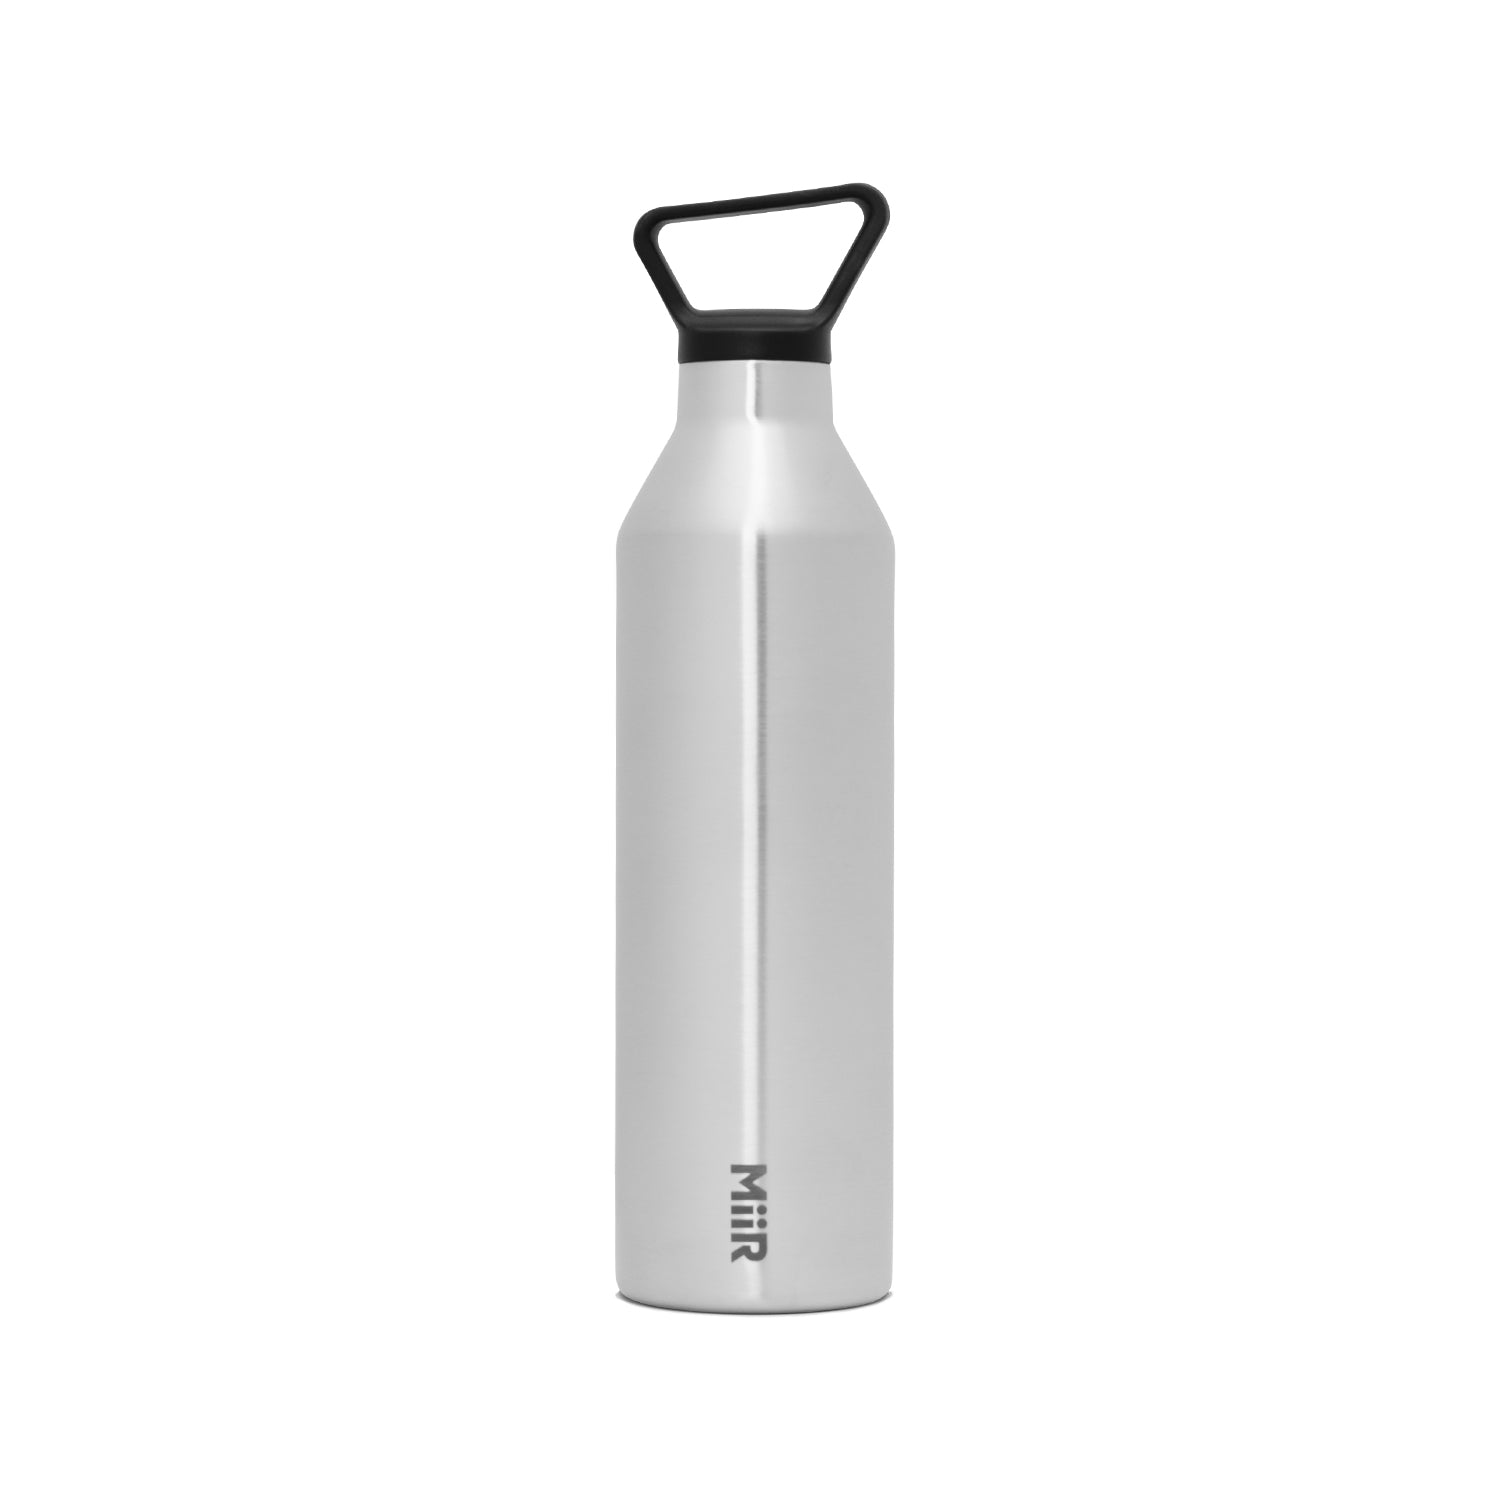  MiiR, Wide Mouth Water Bottle, Vacuum Insulated, Leakproof,  Stainless Steel Construction, Basal, 20 Oz : Sports & Outdoors